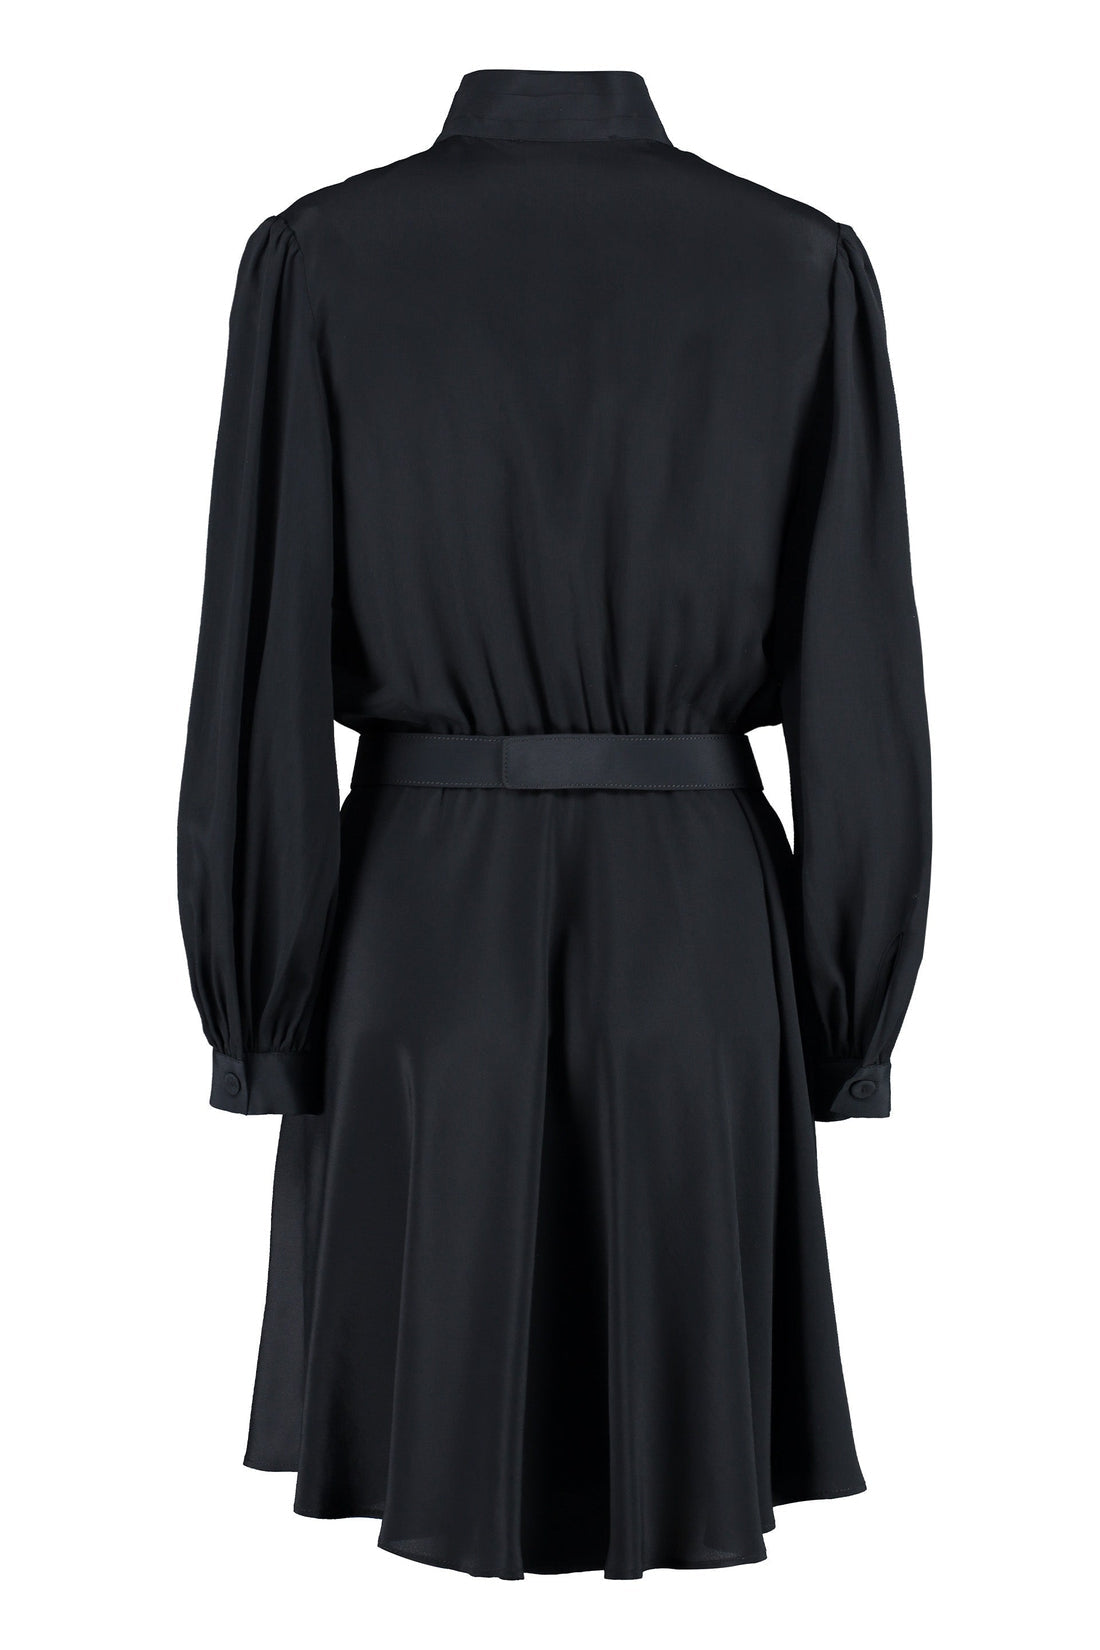 Simona Corsellini-OUTLET-SALE-Belted waist dress-ARCHIVIST